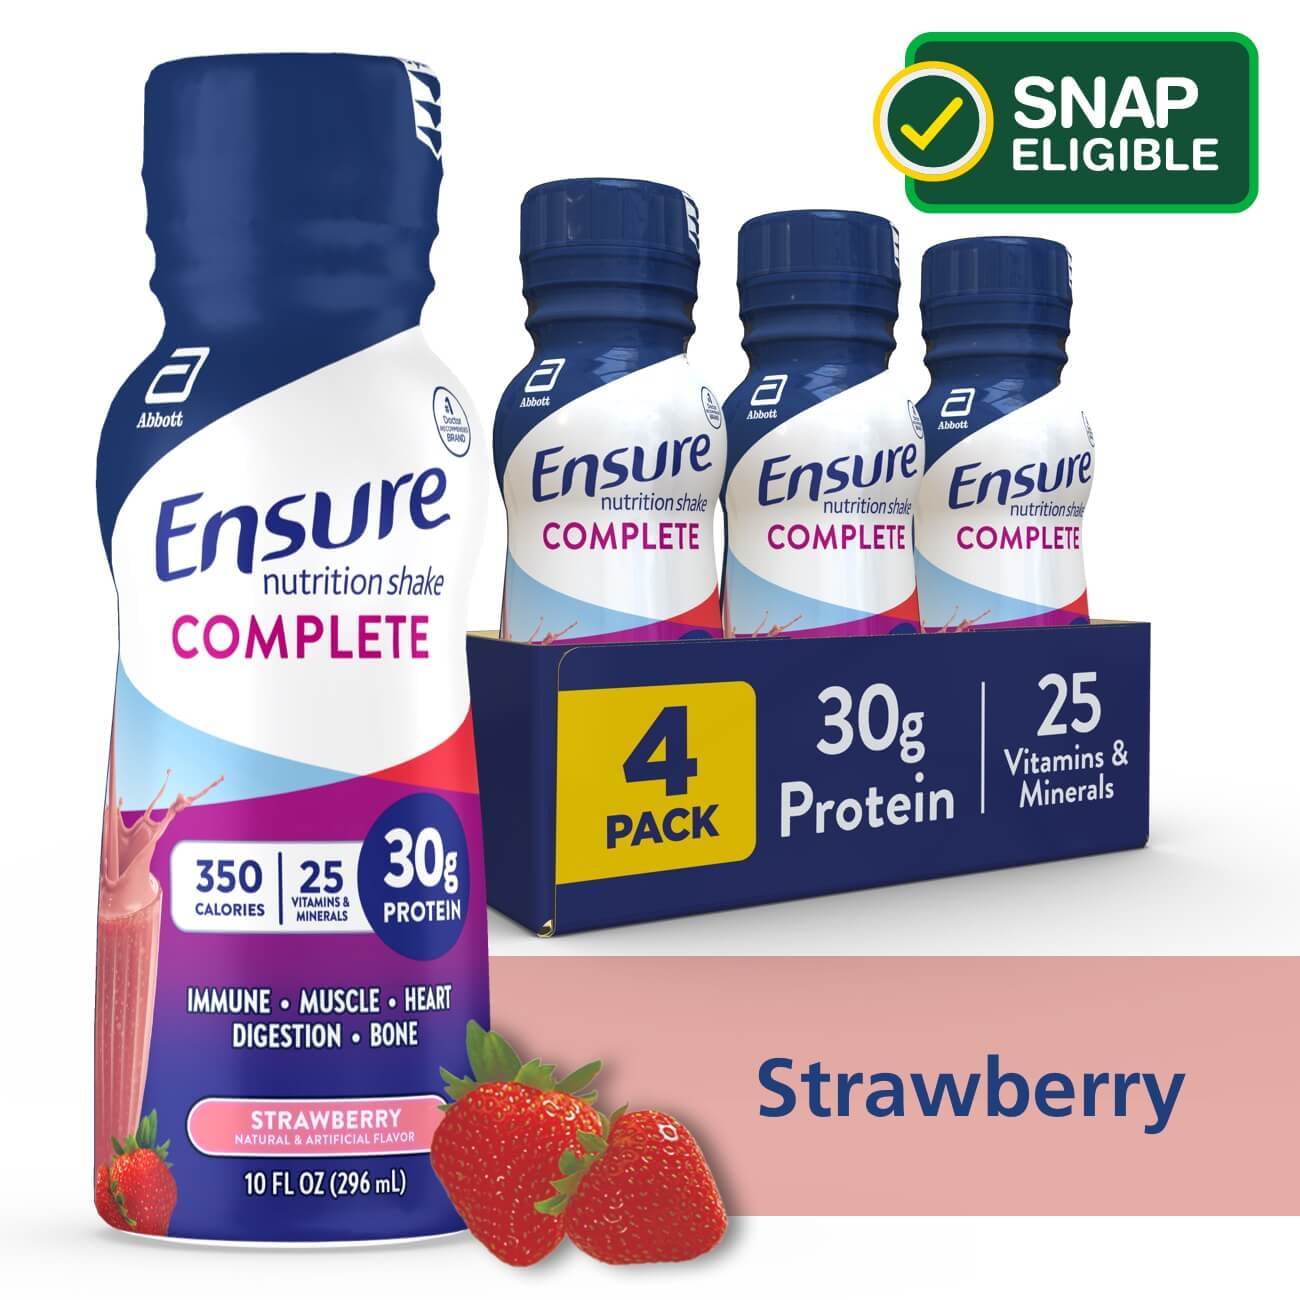 Ensure High Protein Nutrition Shake Strawberry Ready-to-Drink 6 pk